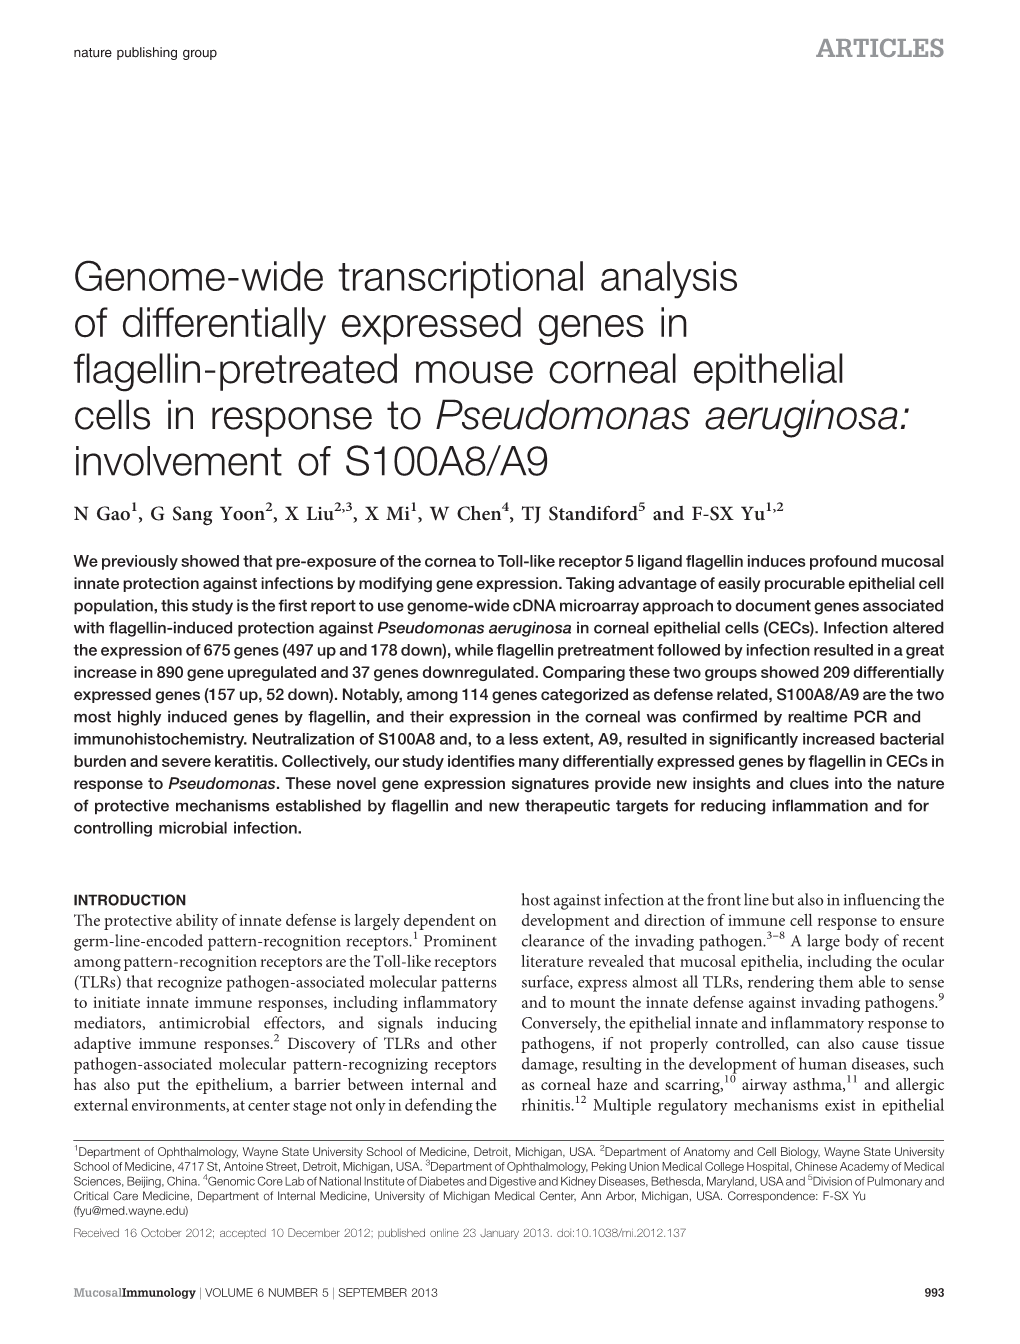 Genome-Wide Transcriptional Analysis of Differentially Expressed Genes In